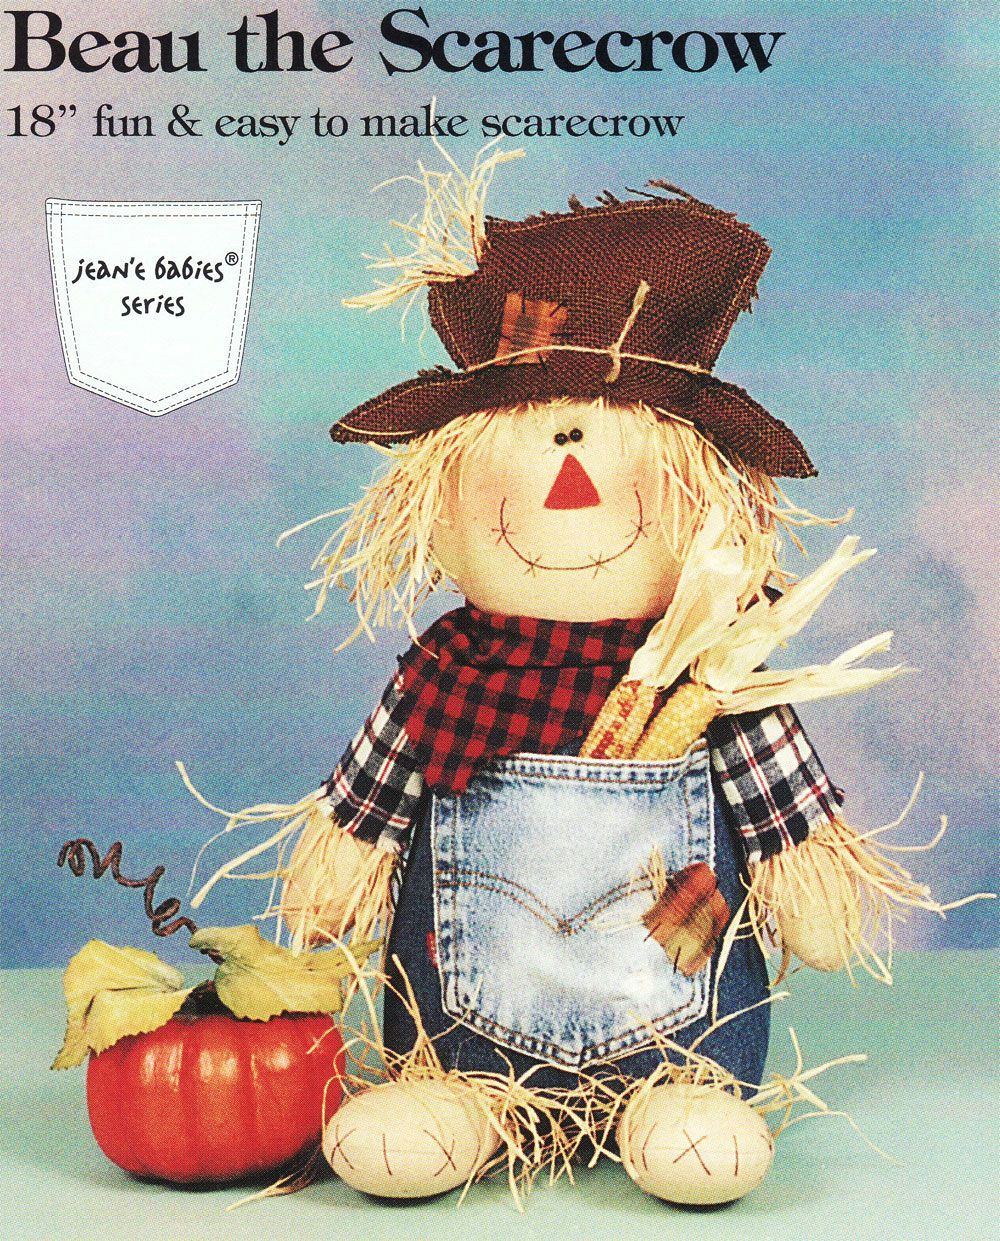 Scarecrow Drawing Easy Inventory Reduction Beau the Scarecrow Sewing Pattern From